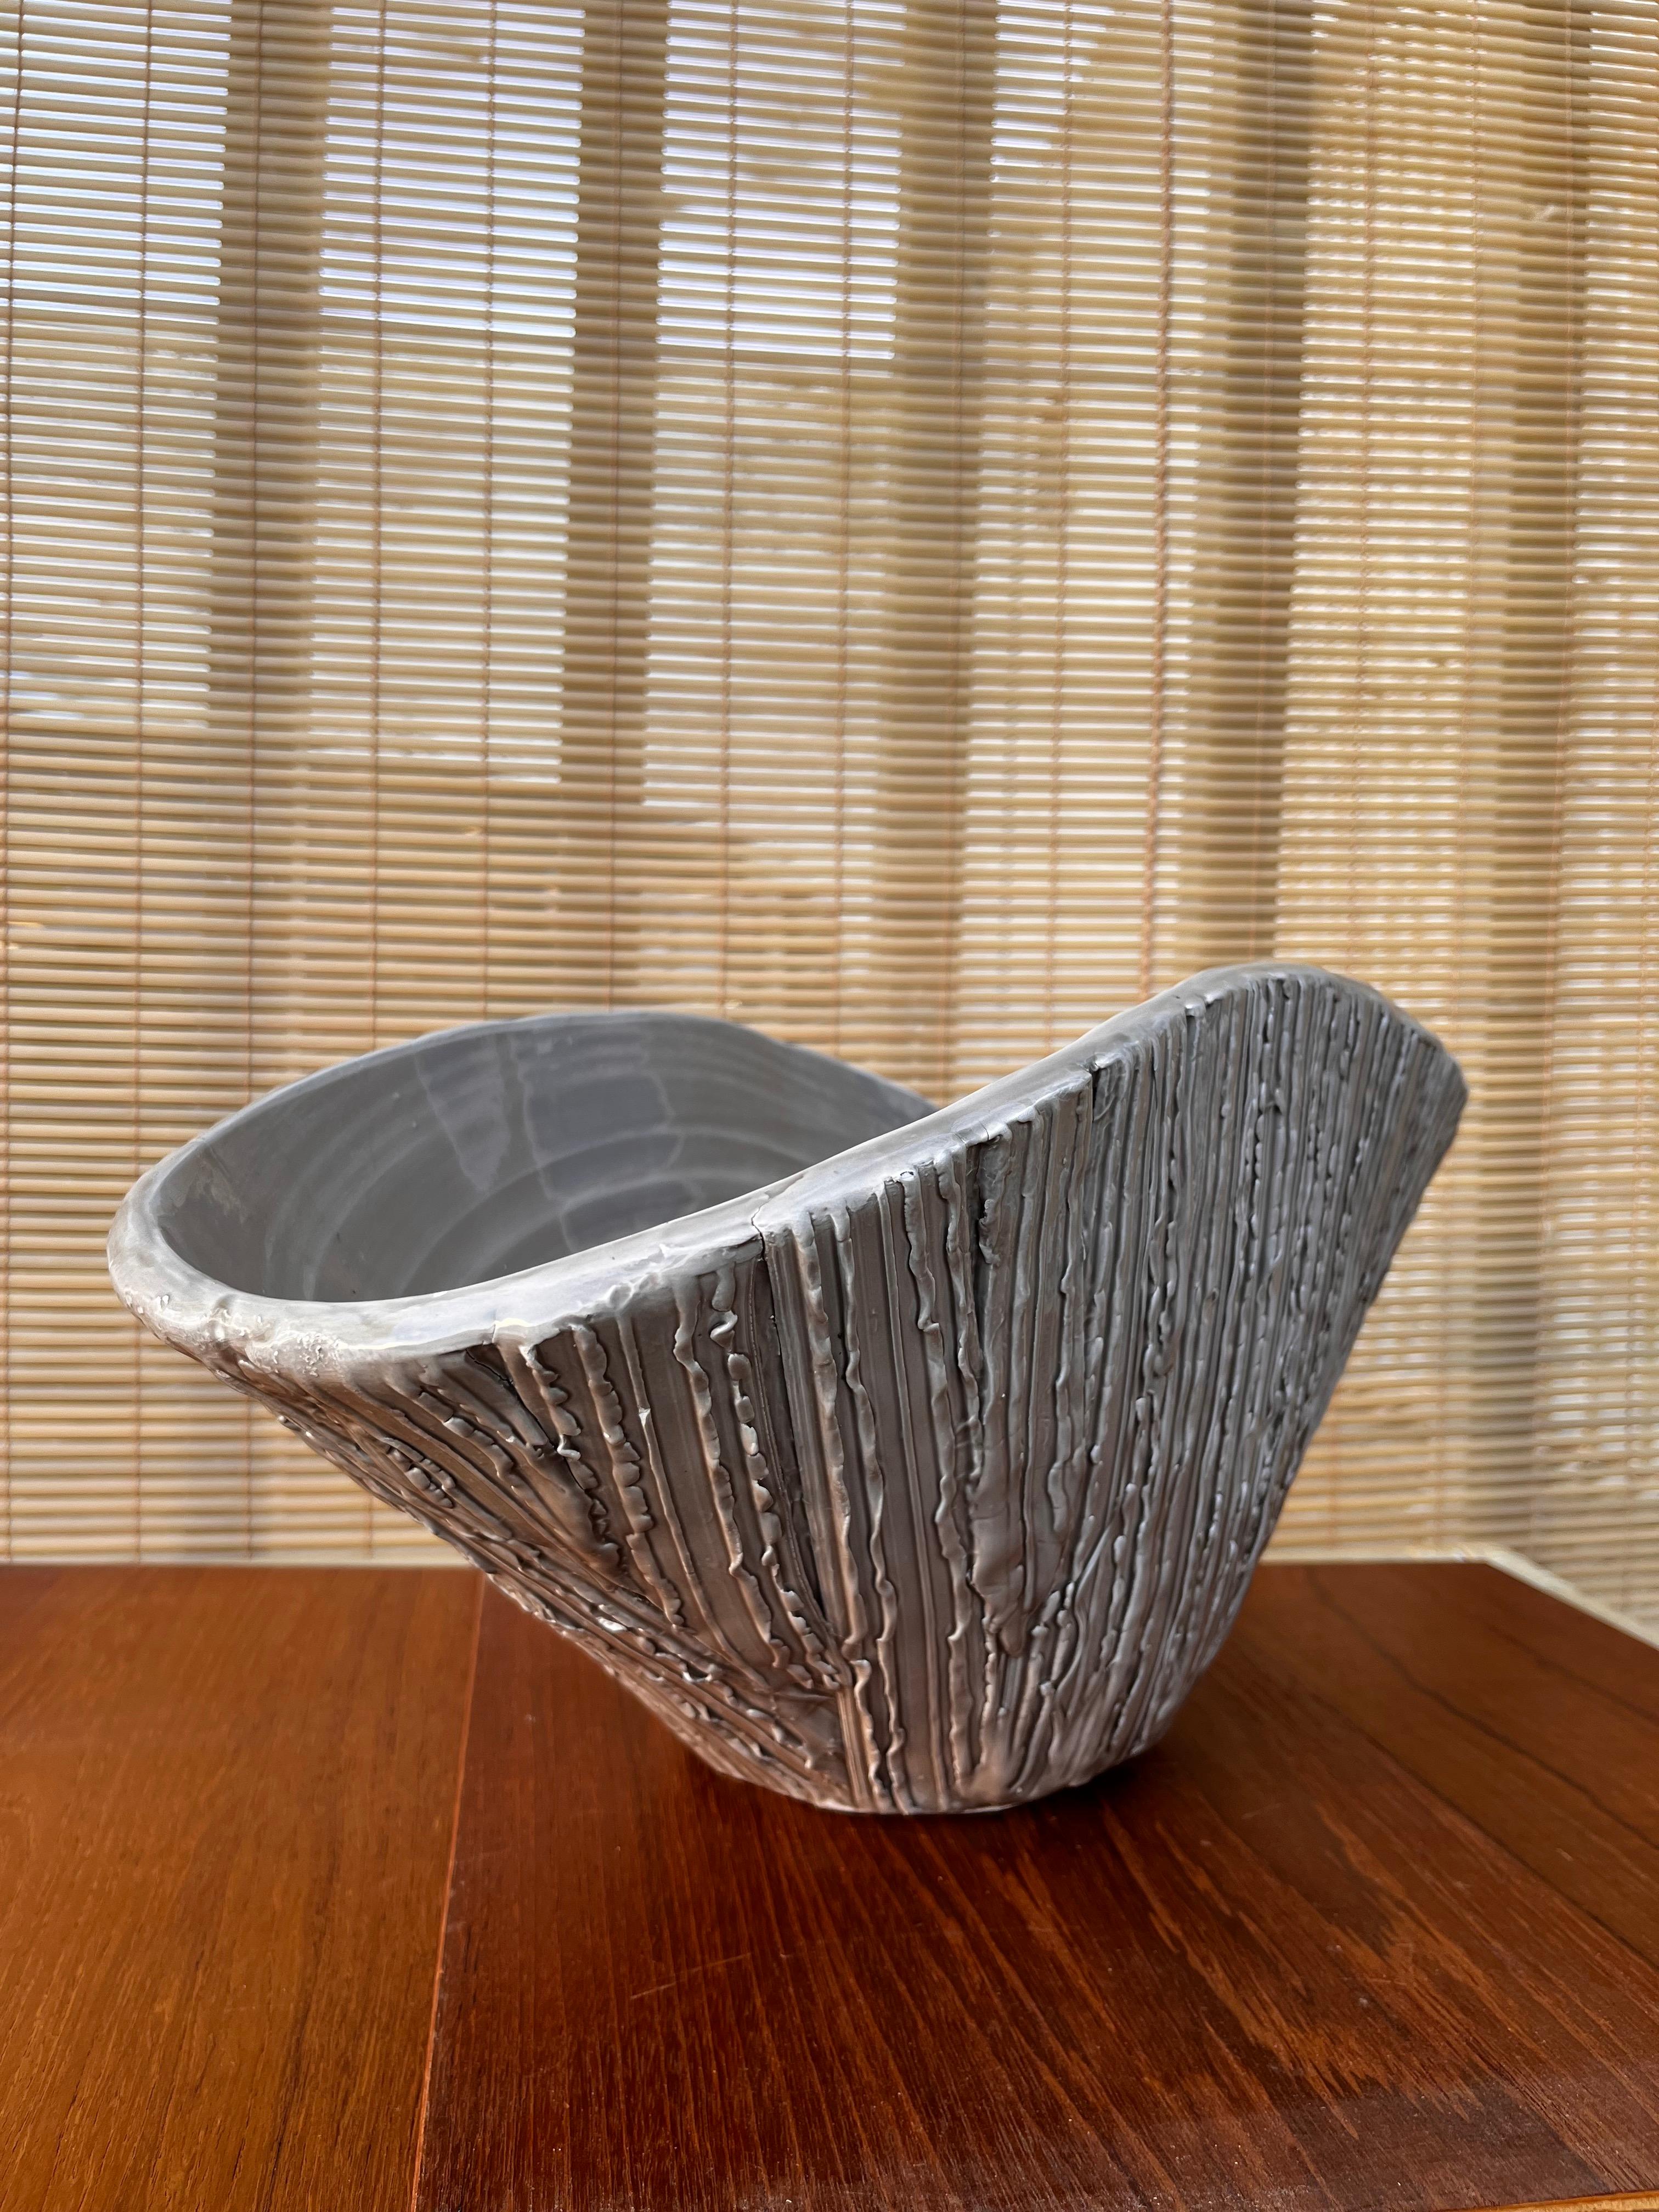 Glazed Large Early 21st Century Textured Ceramic Bowl / Centerpiece by Abigails, Italy For Sale